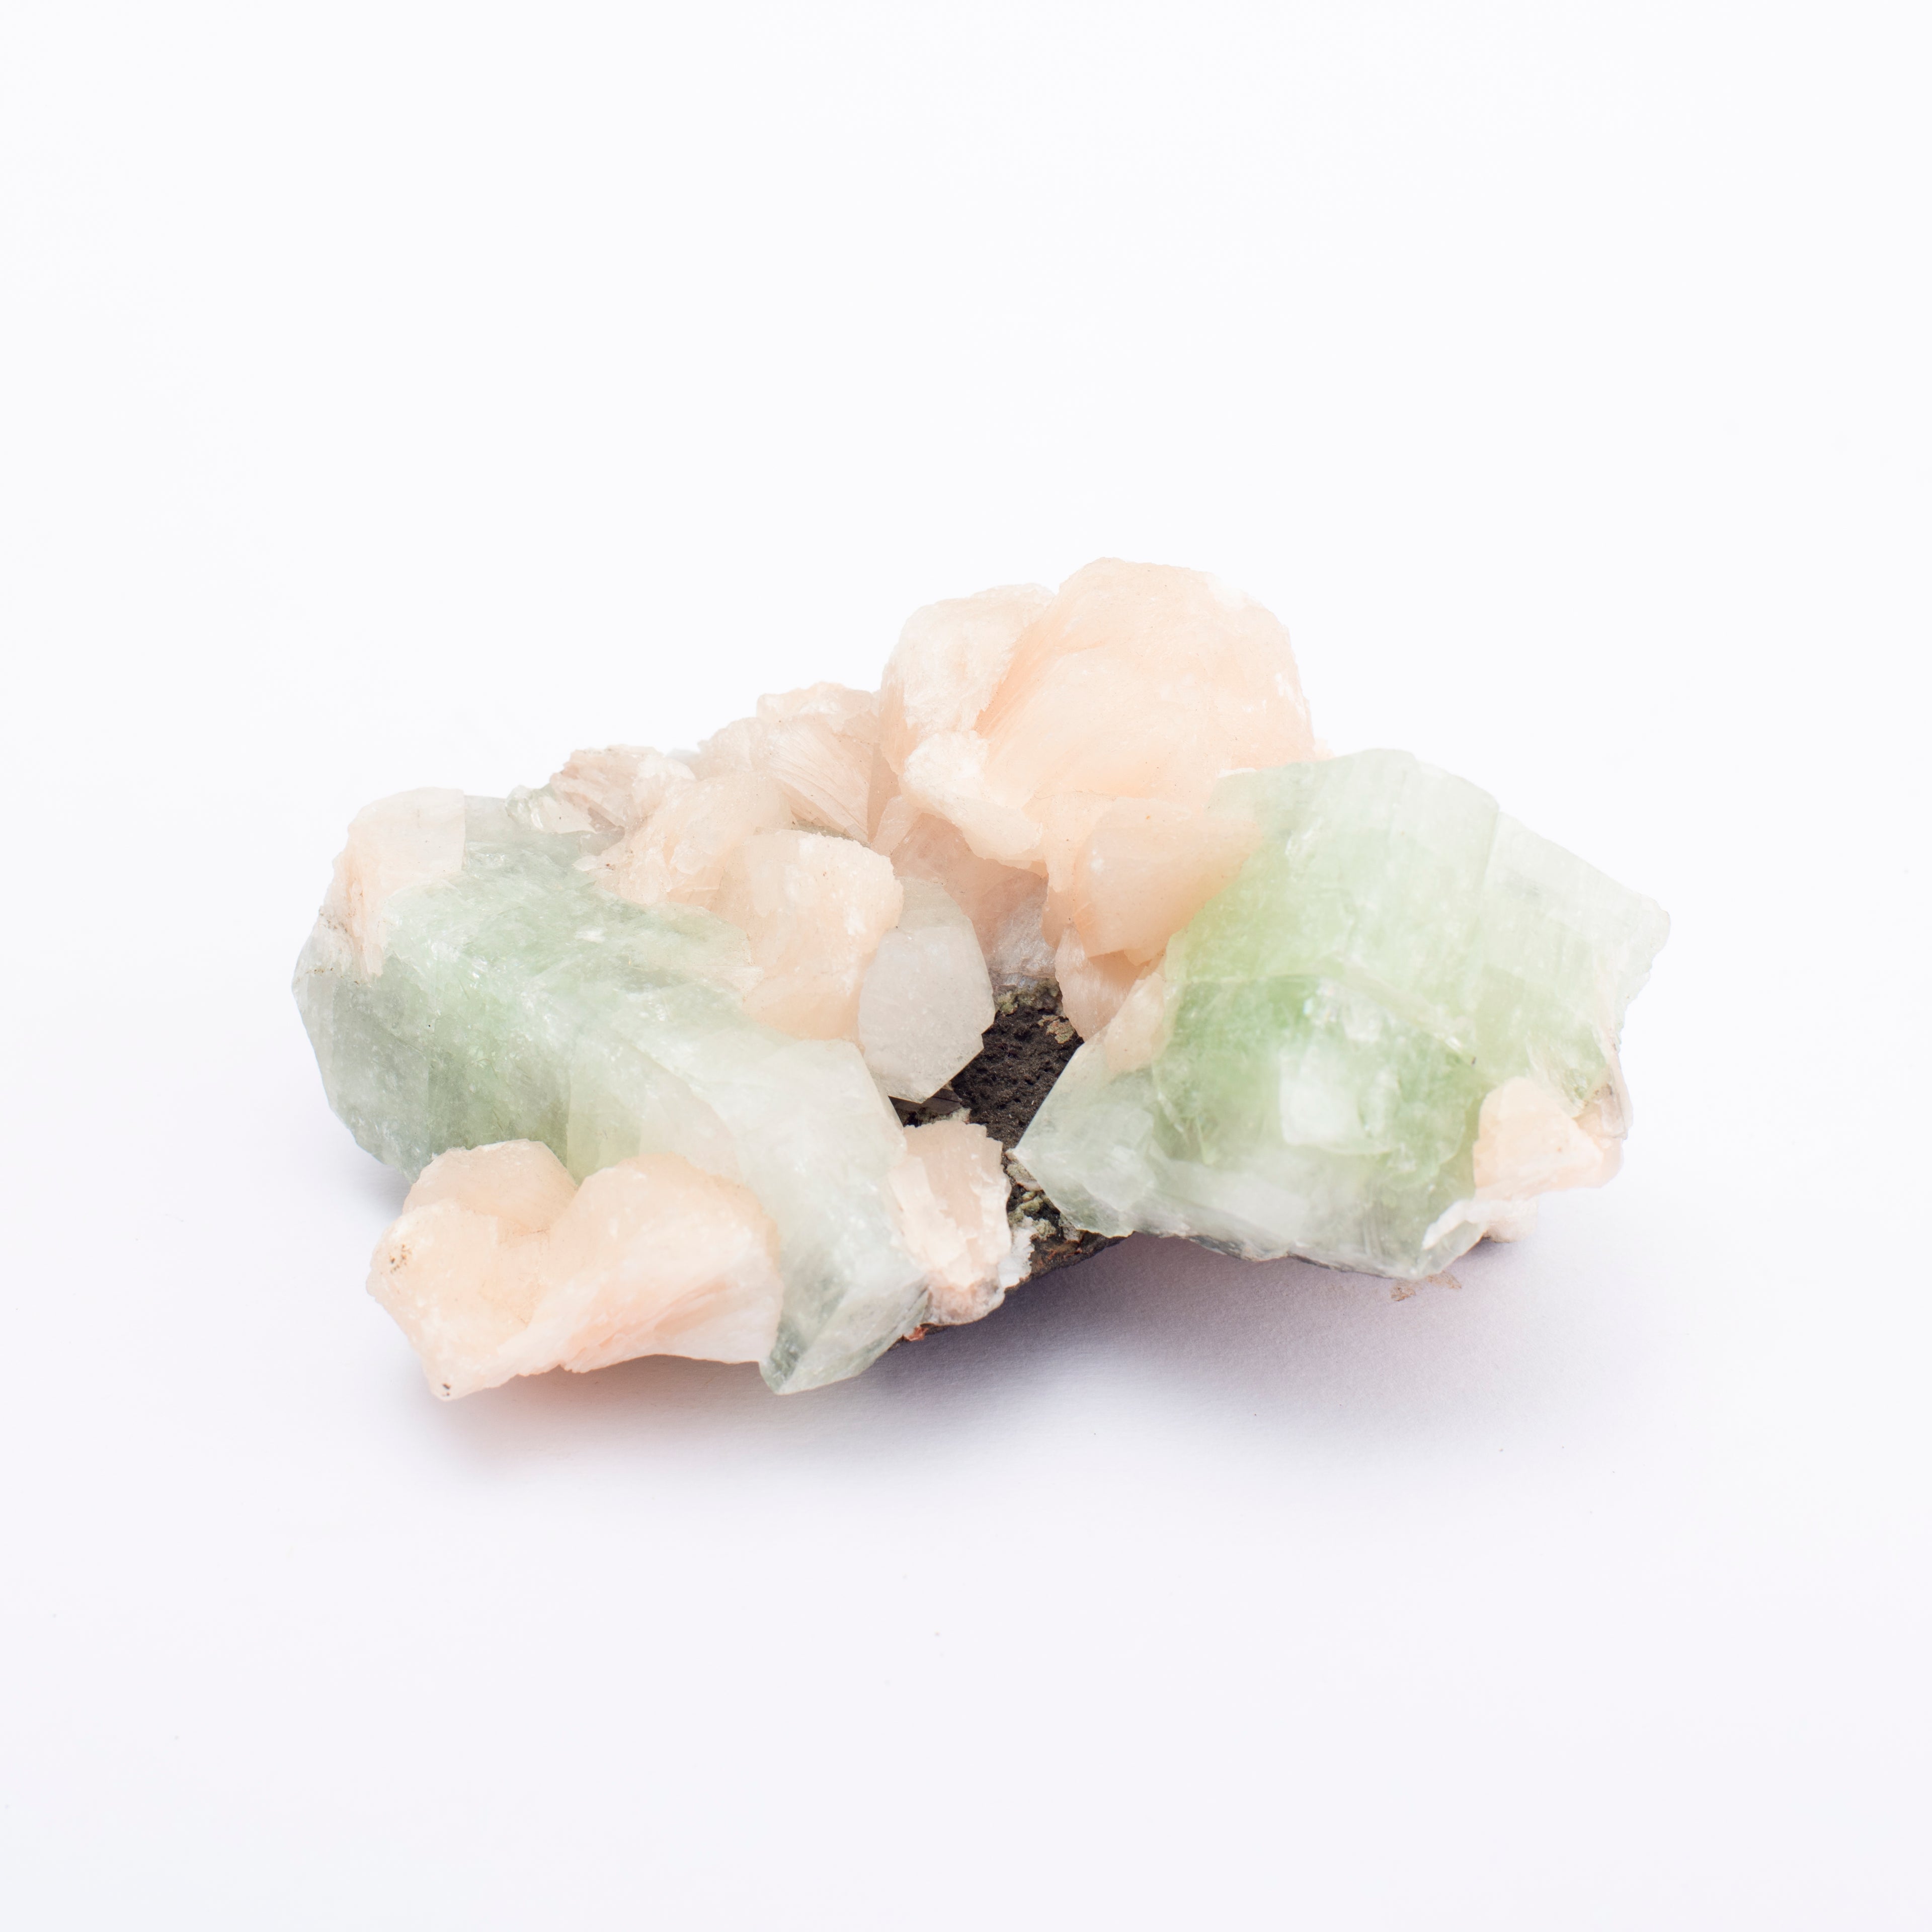 Himalayan Quartz with Apophyllite Green and Stilbite Cluster